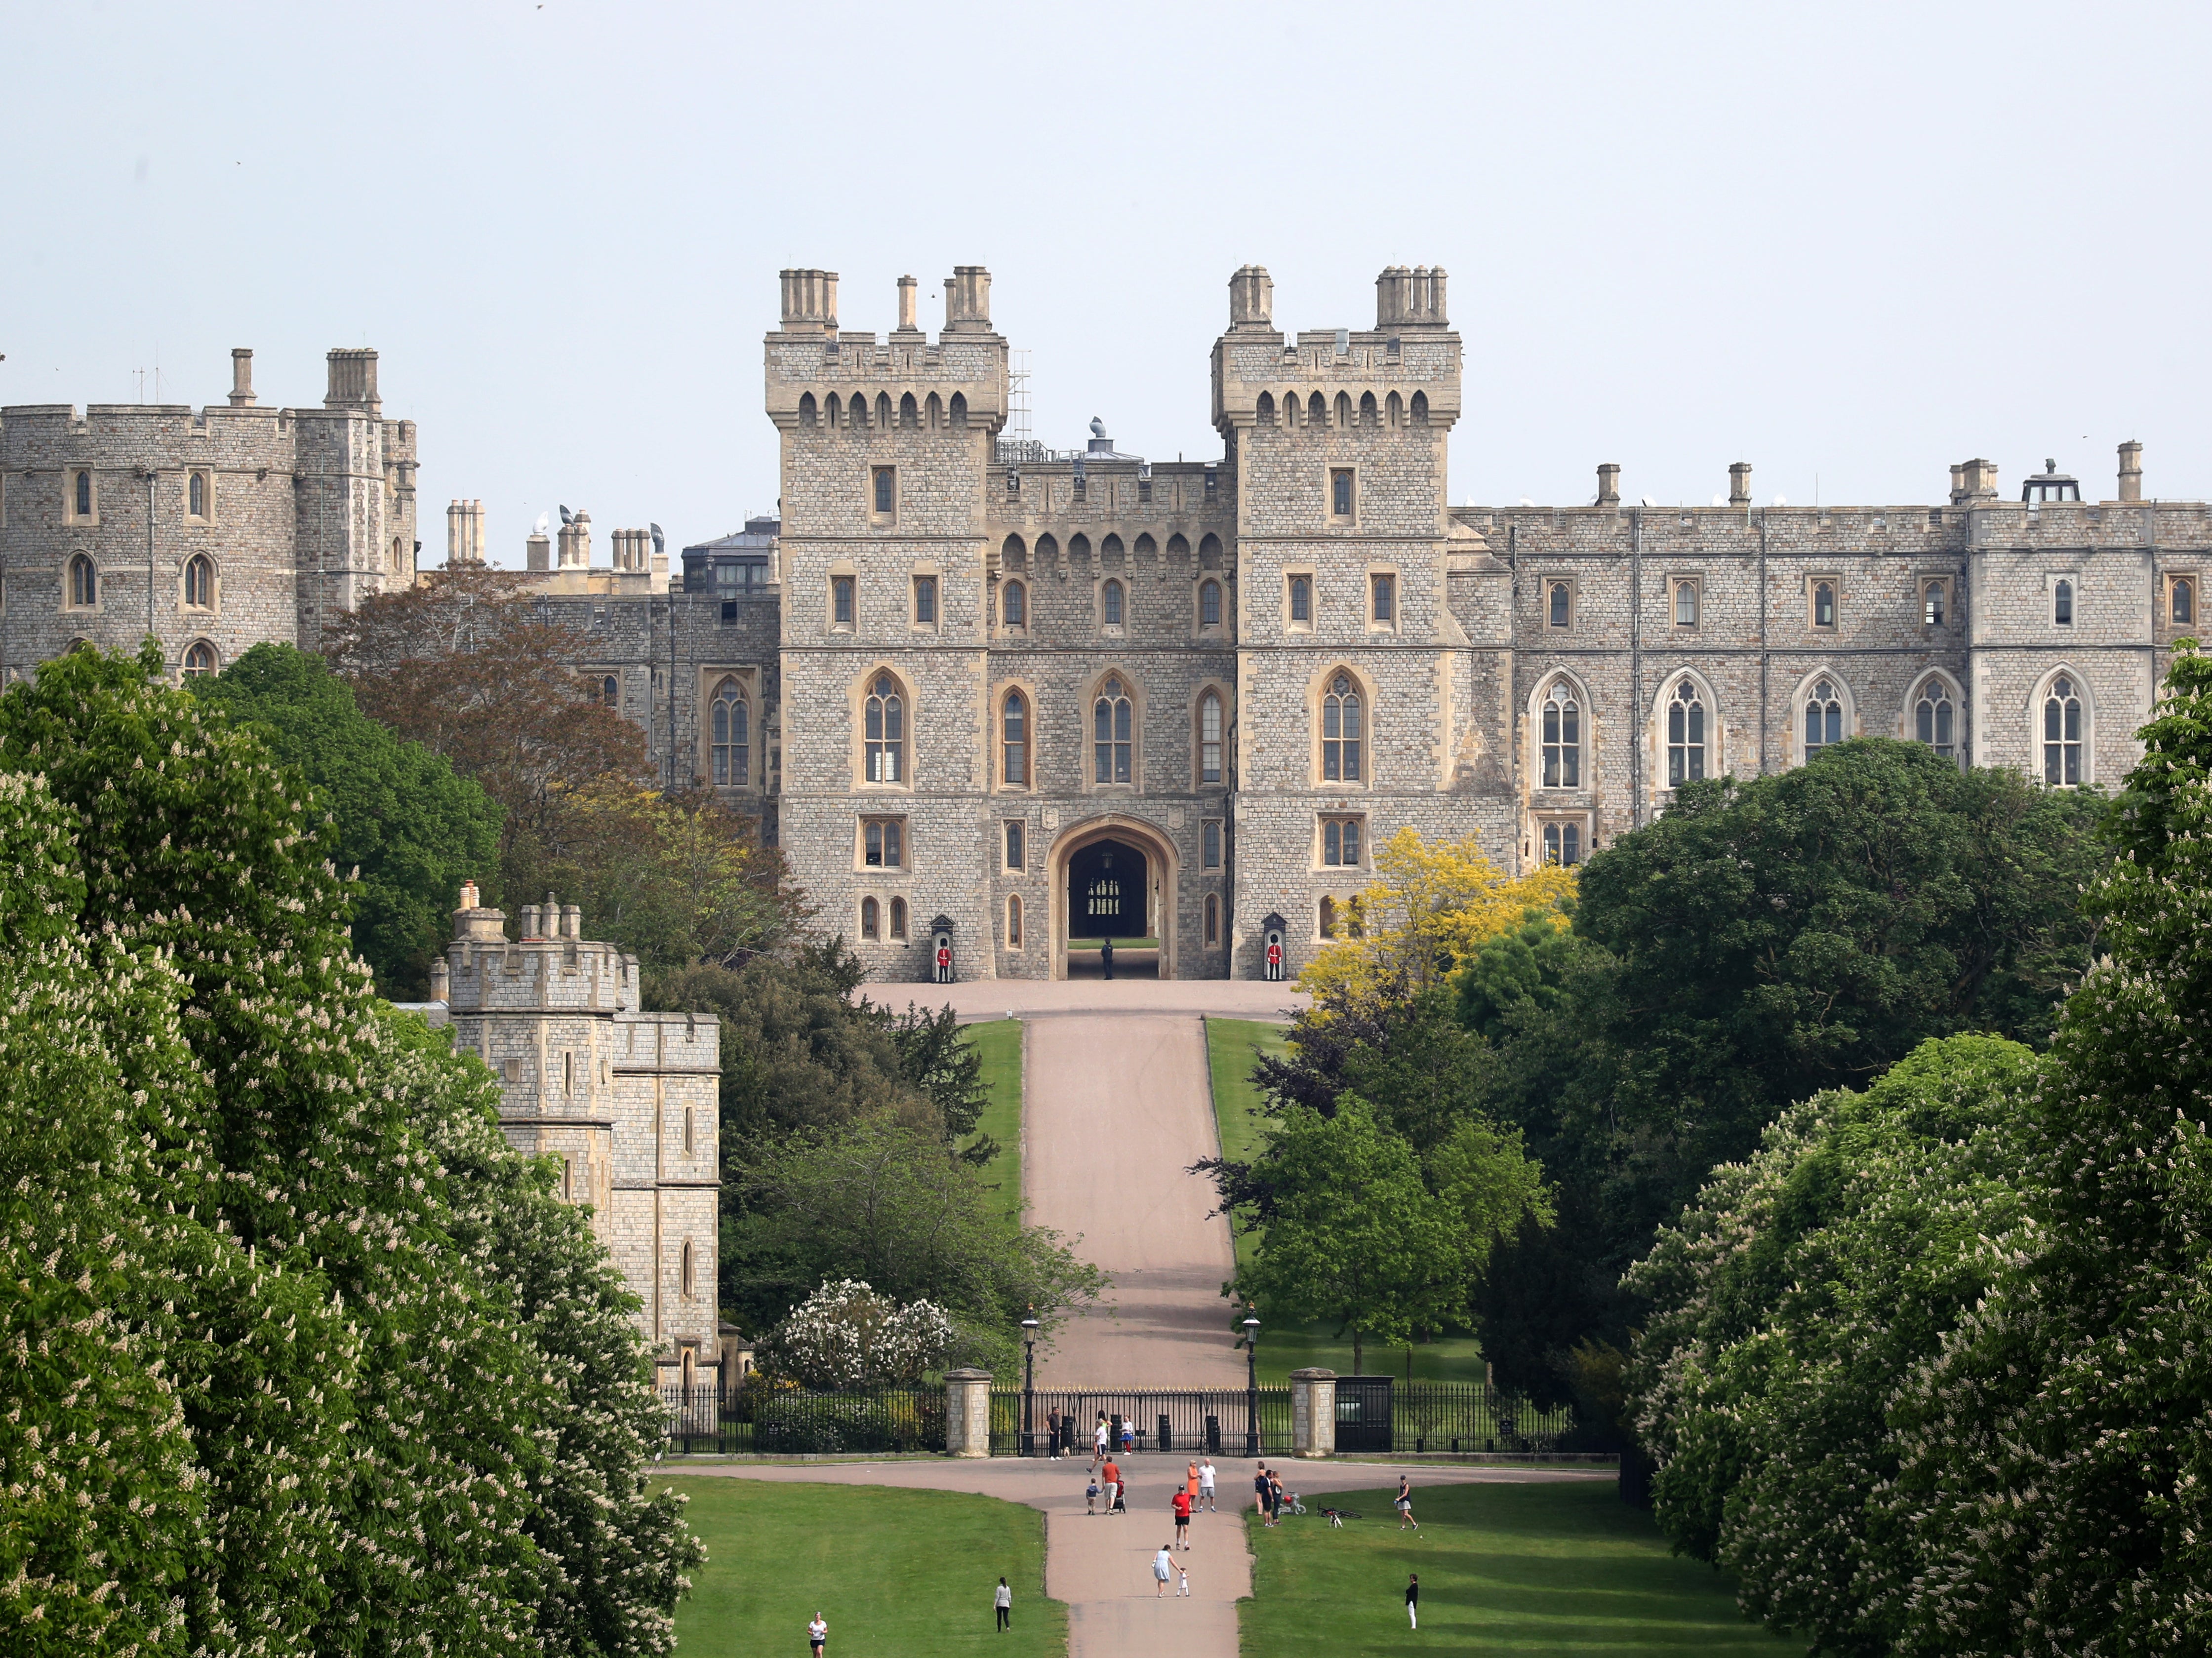 A general view of people on The Long Walk and Windsor Castle